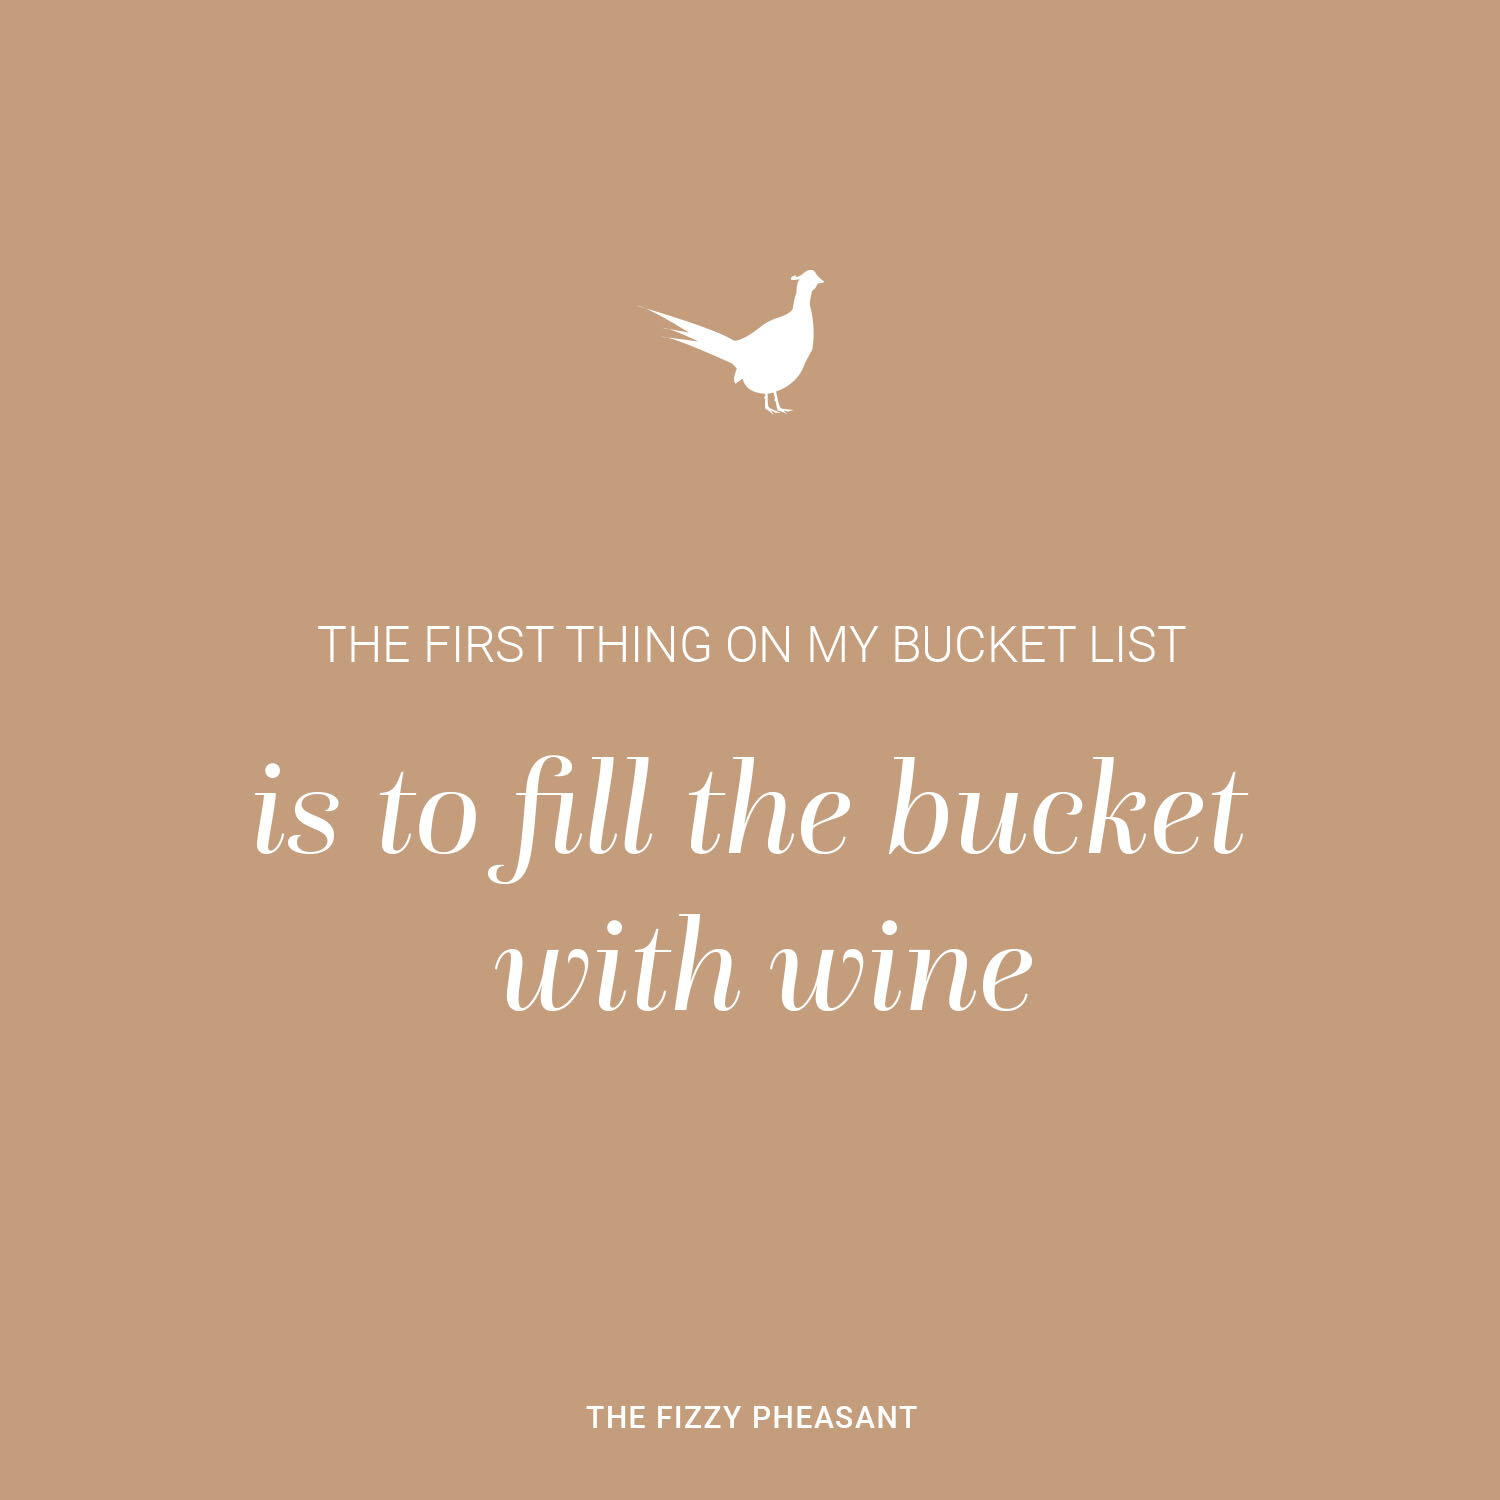 THE FIRST THING ON MY BUCKET LIST, IS TO FILL THE BUCKET WITH WINE.jpg